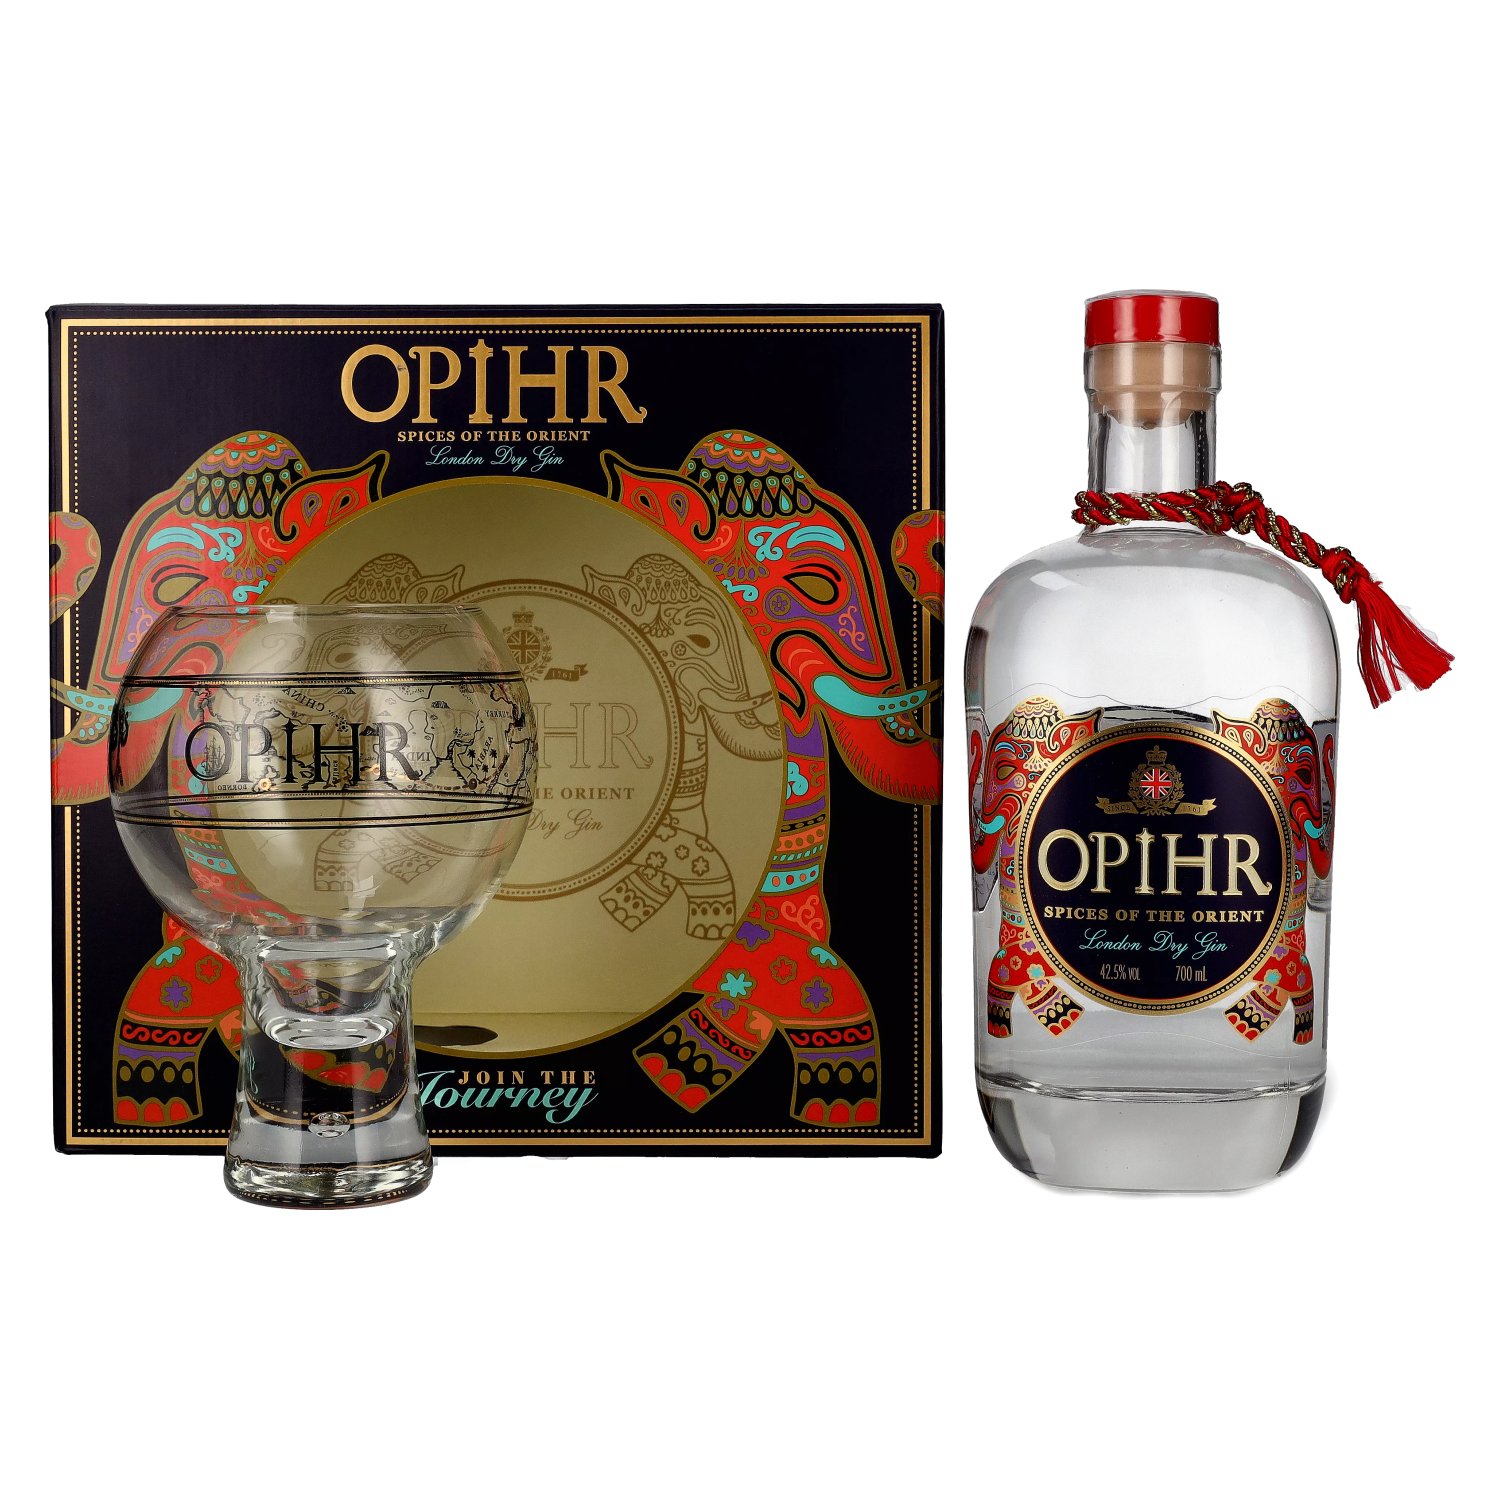 Opihr ORIENTAL SPICED London Dry Gin 42,5% Vol. 0,7l in Giftbox with  Globe-glass